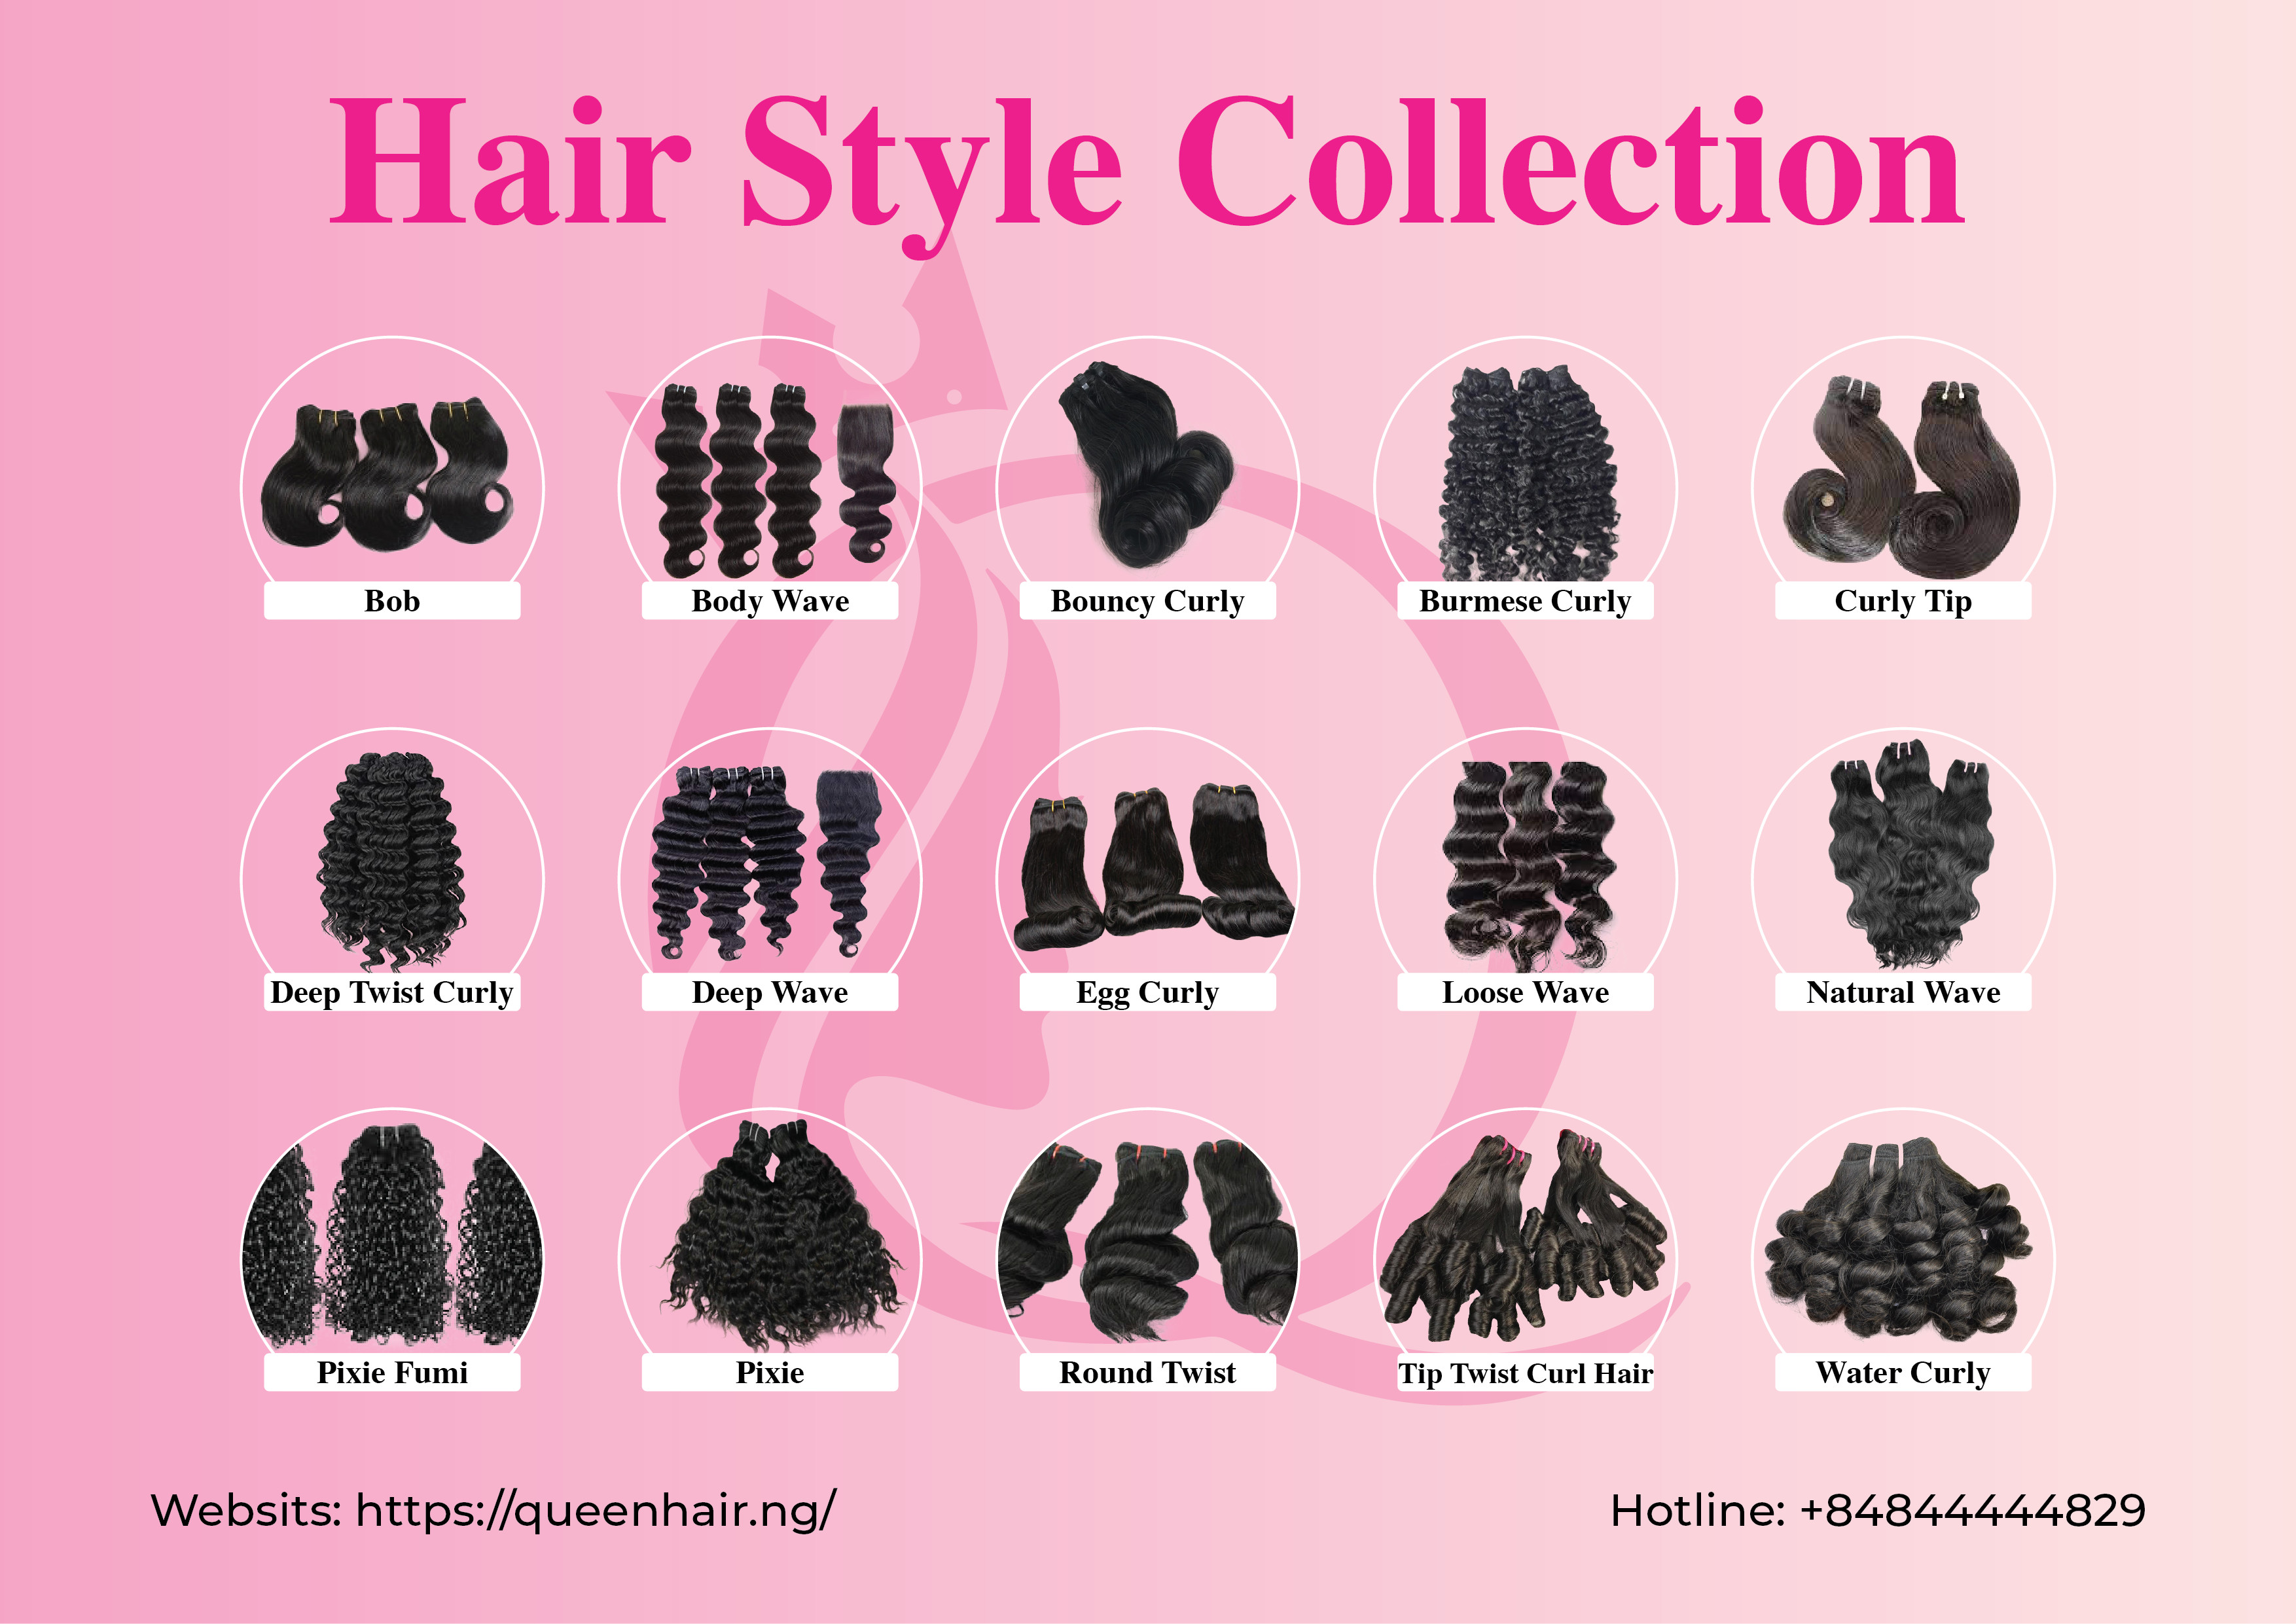 Hair Style Collection of Queen Hair